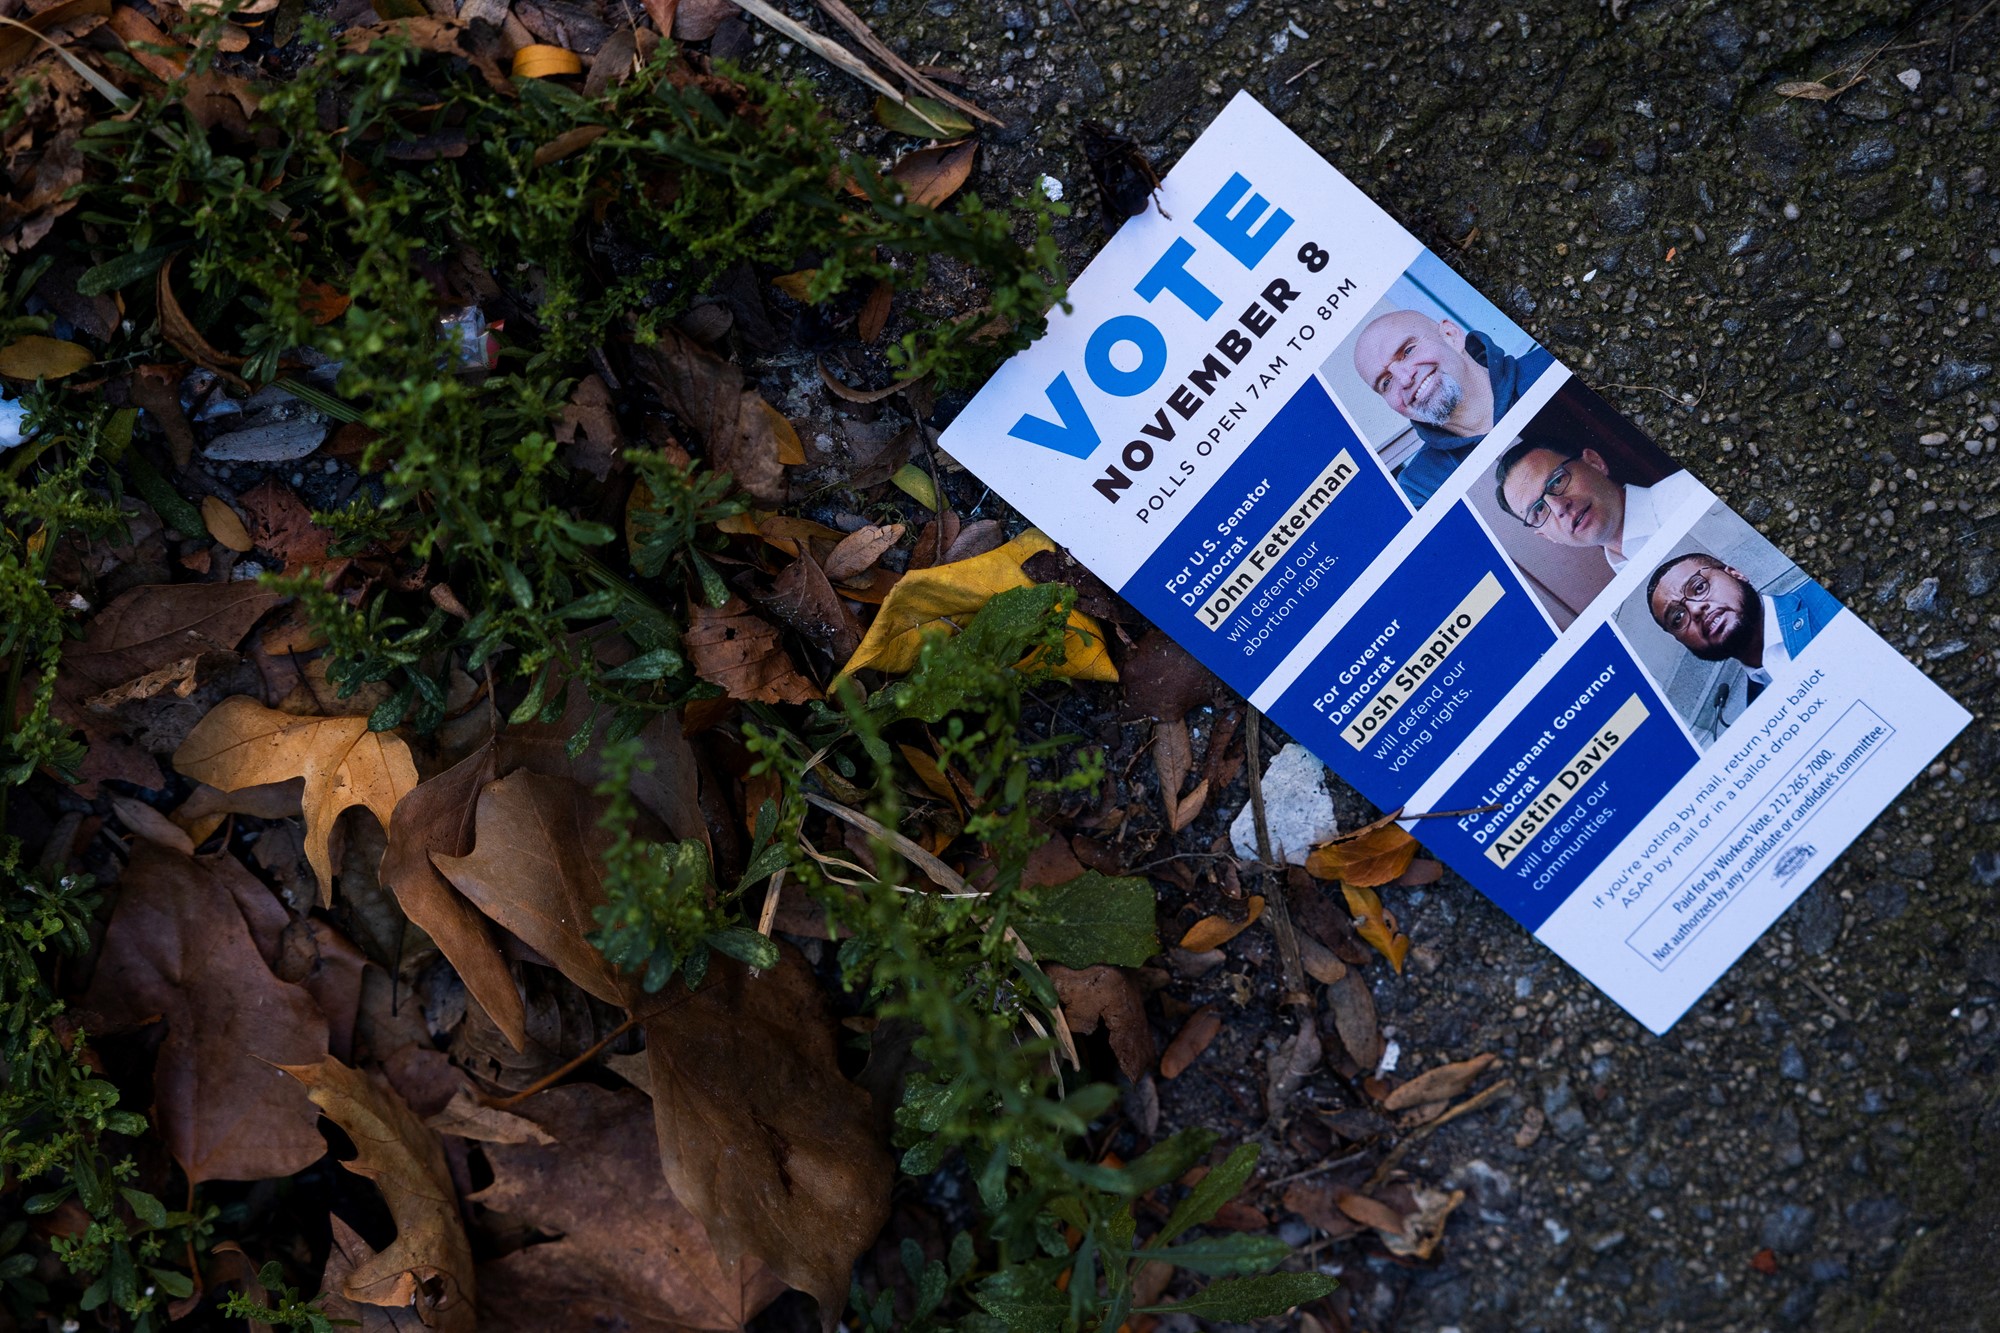 A vote pamphlet on the ground next to some leaves.